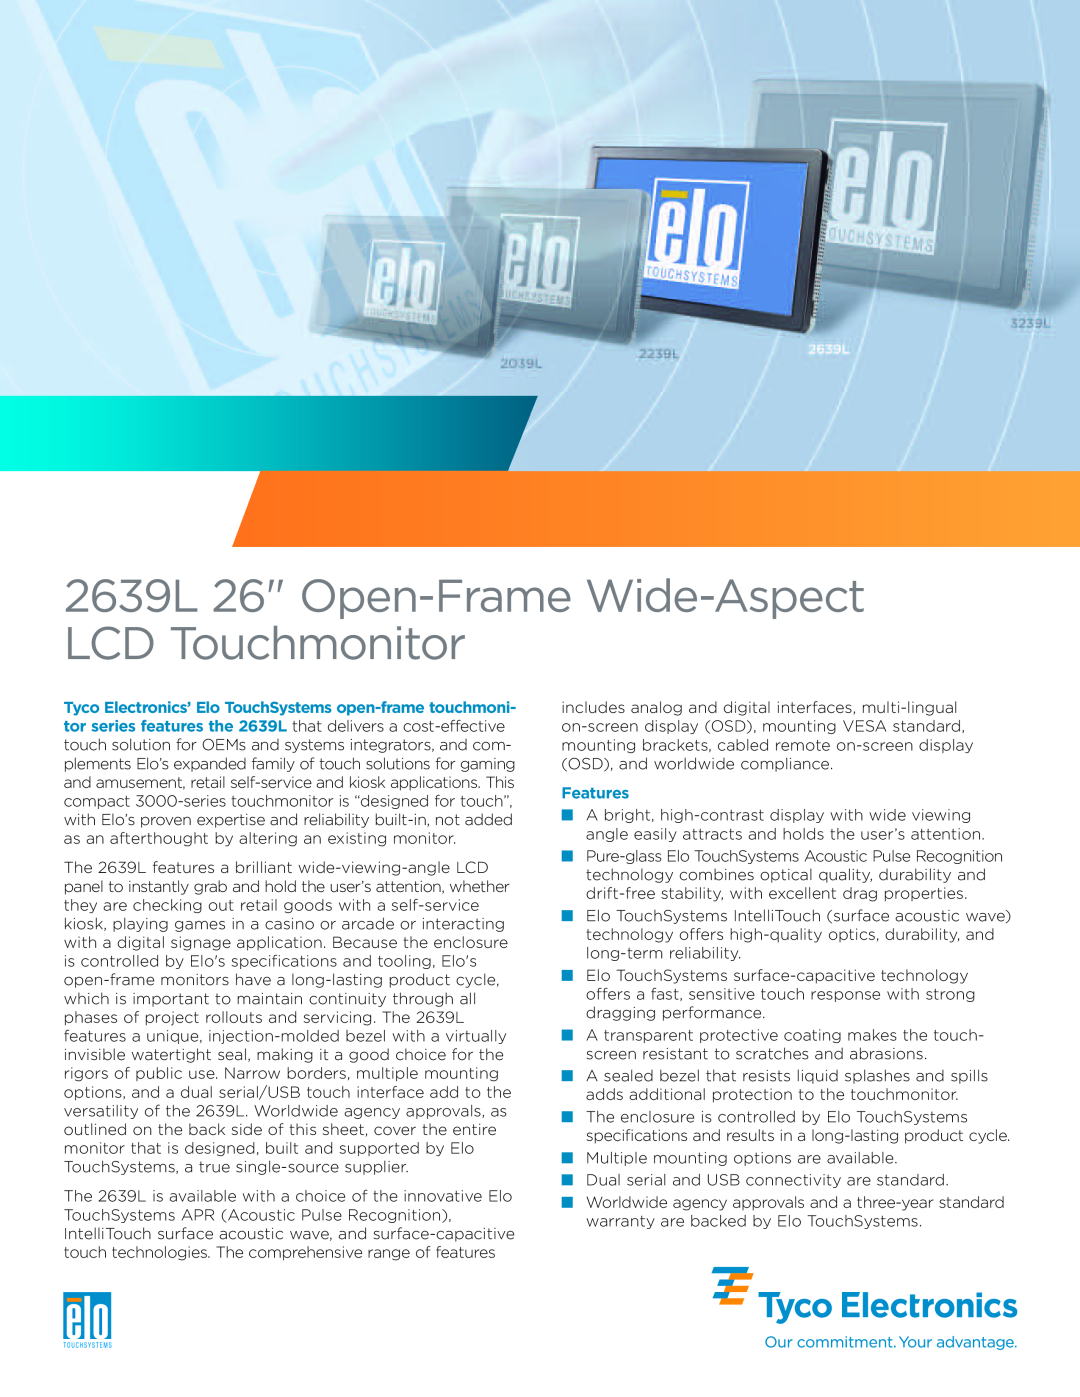 Elo TouchSystems specifications Features, 2639L 26 Open-FrameWide-Aspect LCDTouchmonitor 